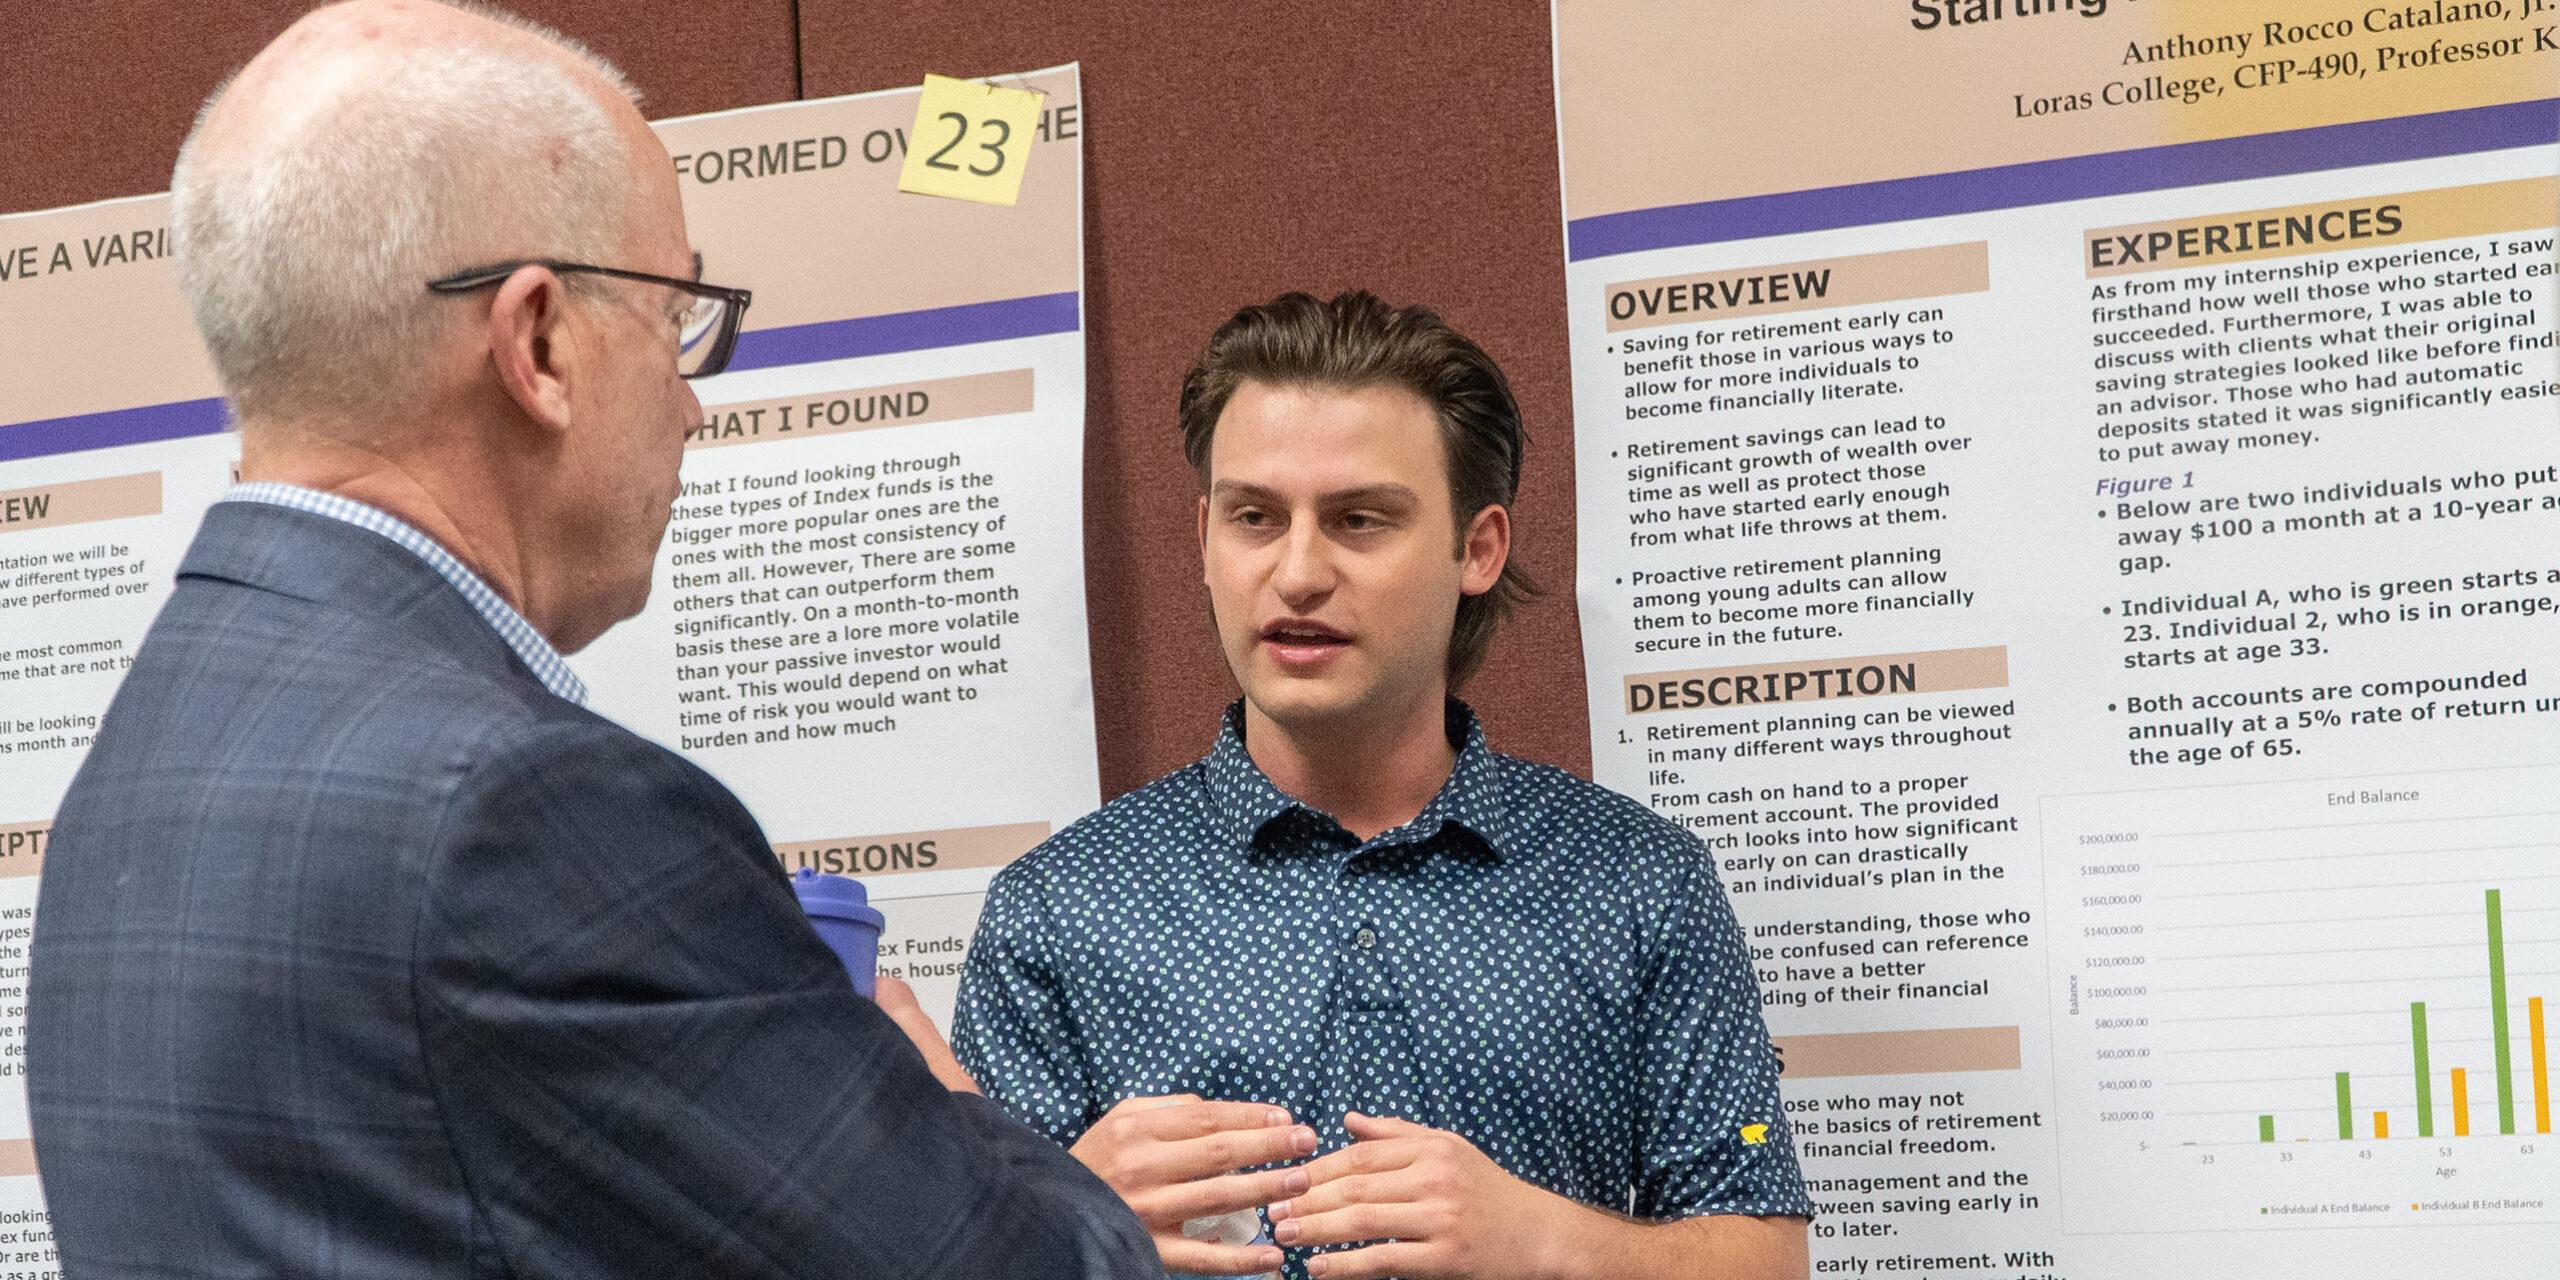 Proud Loras College student discussing research project with Loras President Jim Collins ('84) at the Legacy Symposium in spring